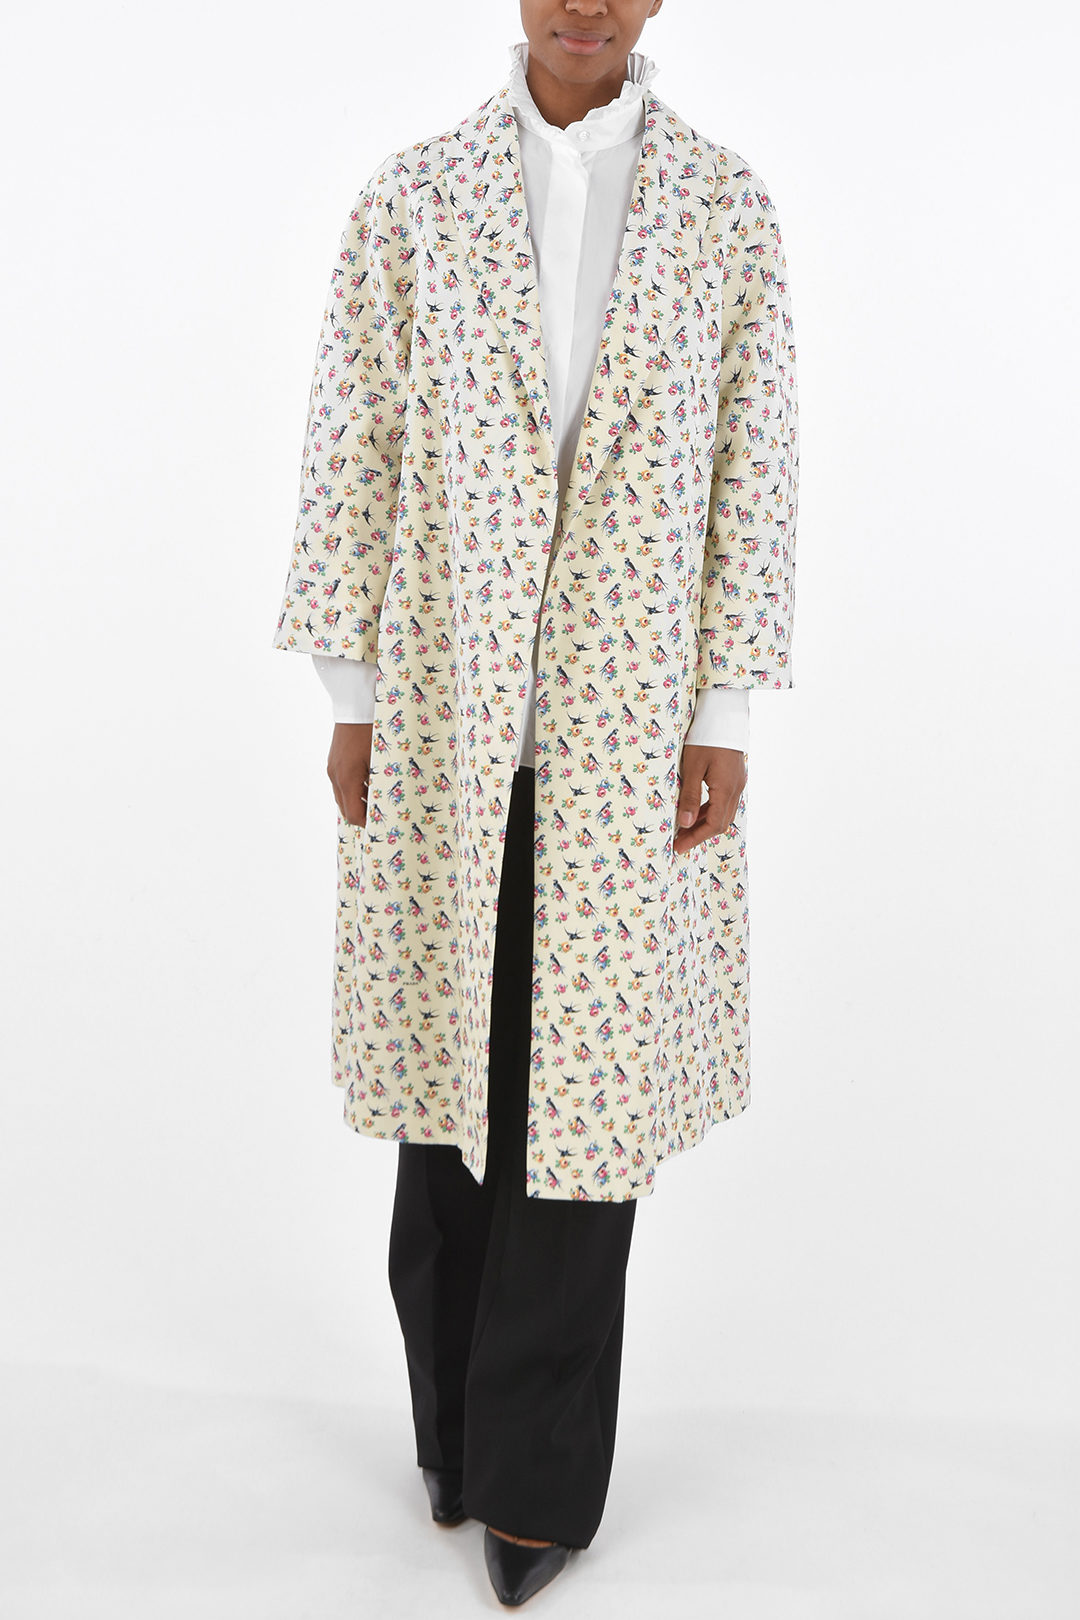 Prada Floral Patterned Silk Trench with Flap Pockets women - Glamood Outlet